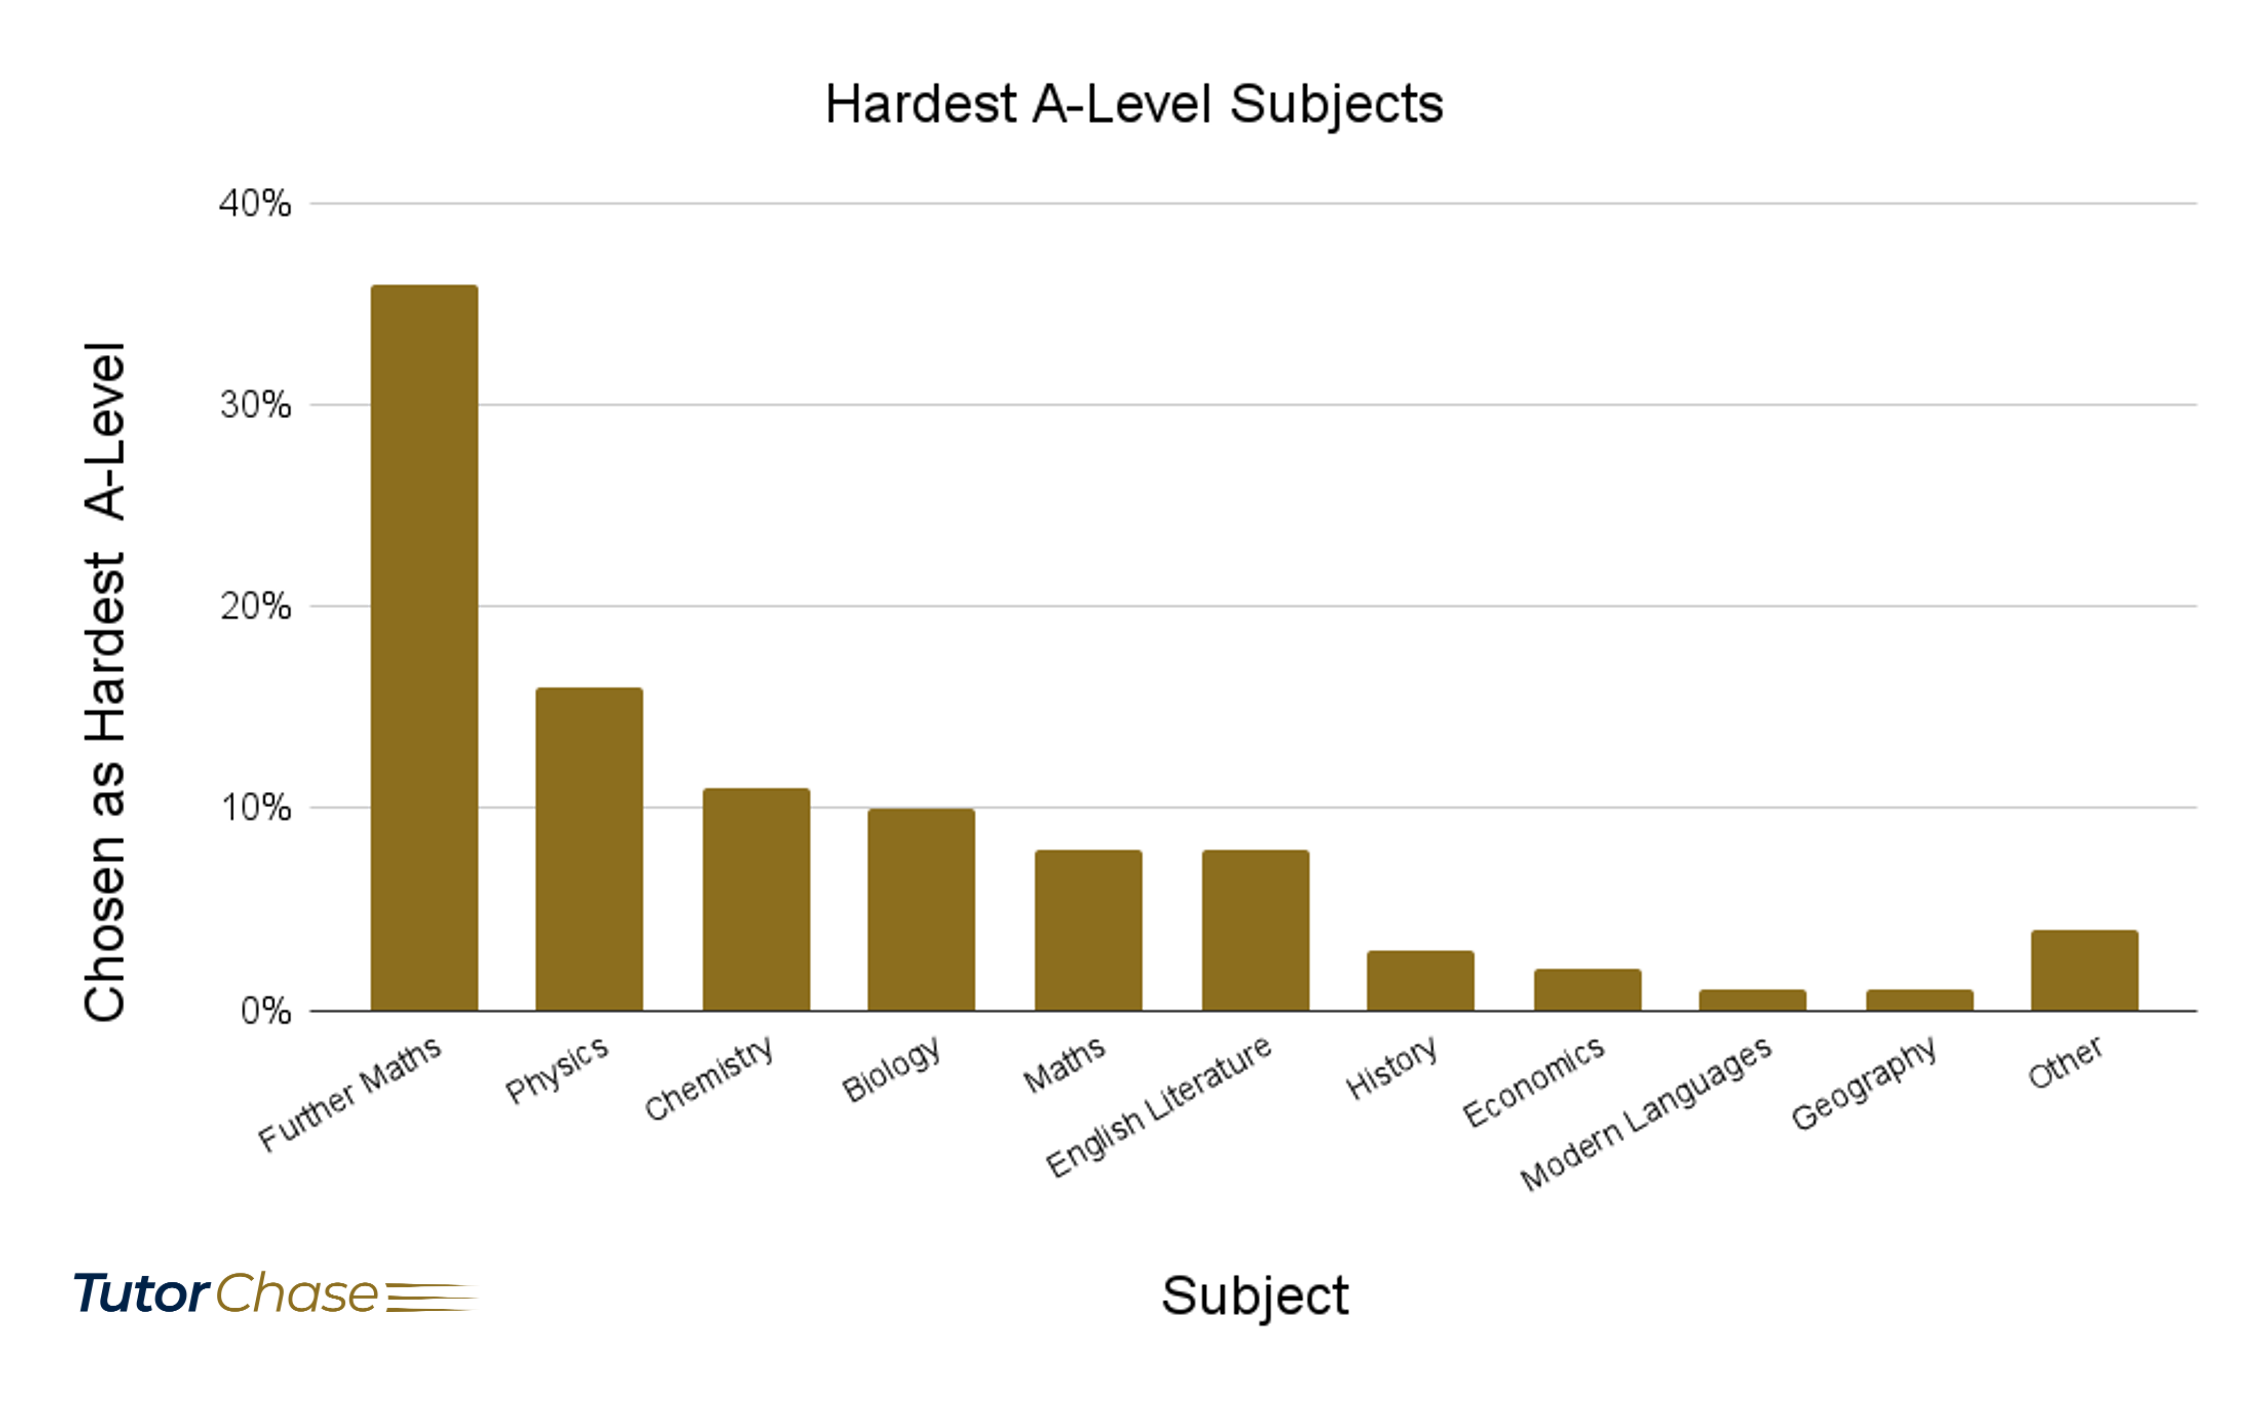 Survey of hardest A-Level subjects answered by teachers and lecturers